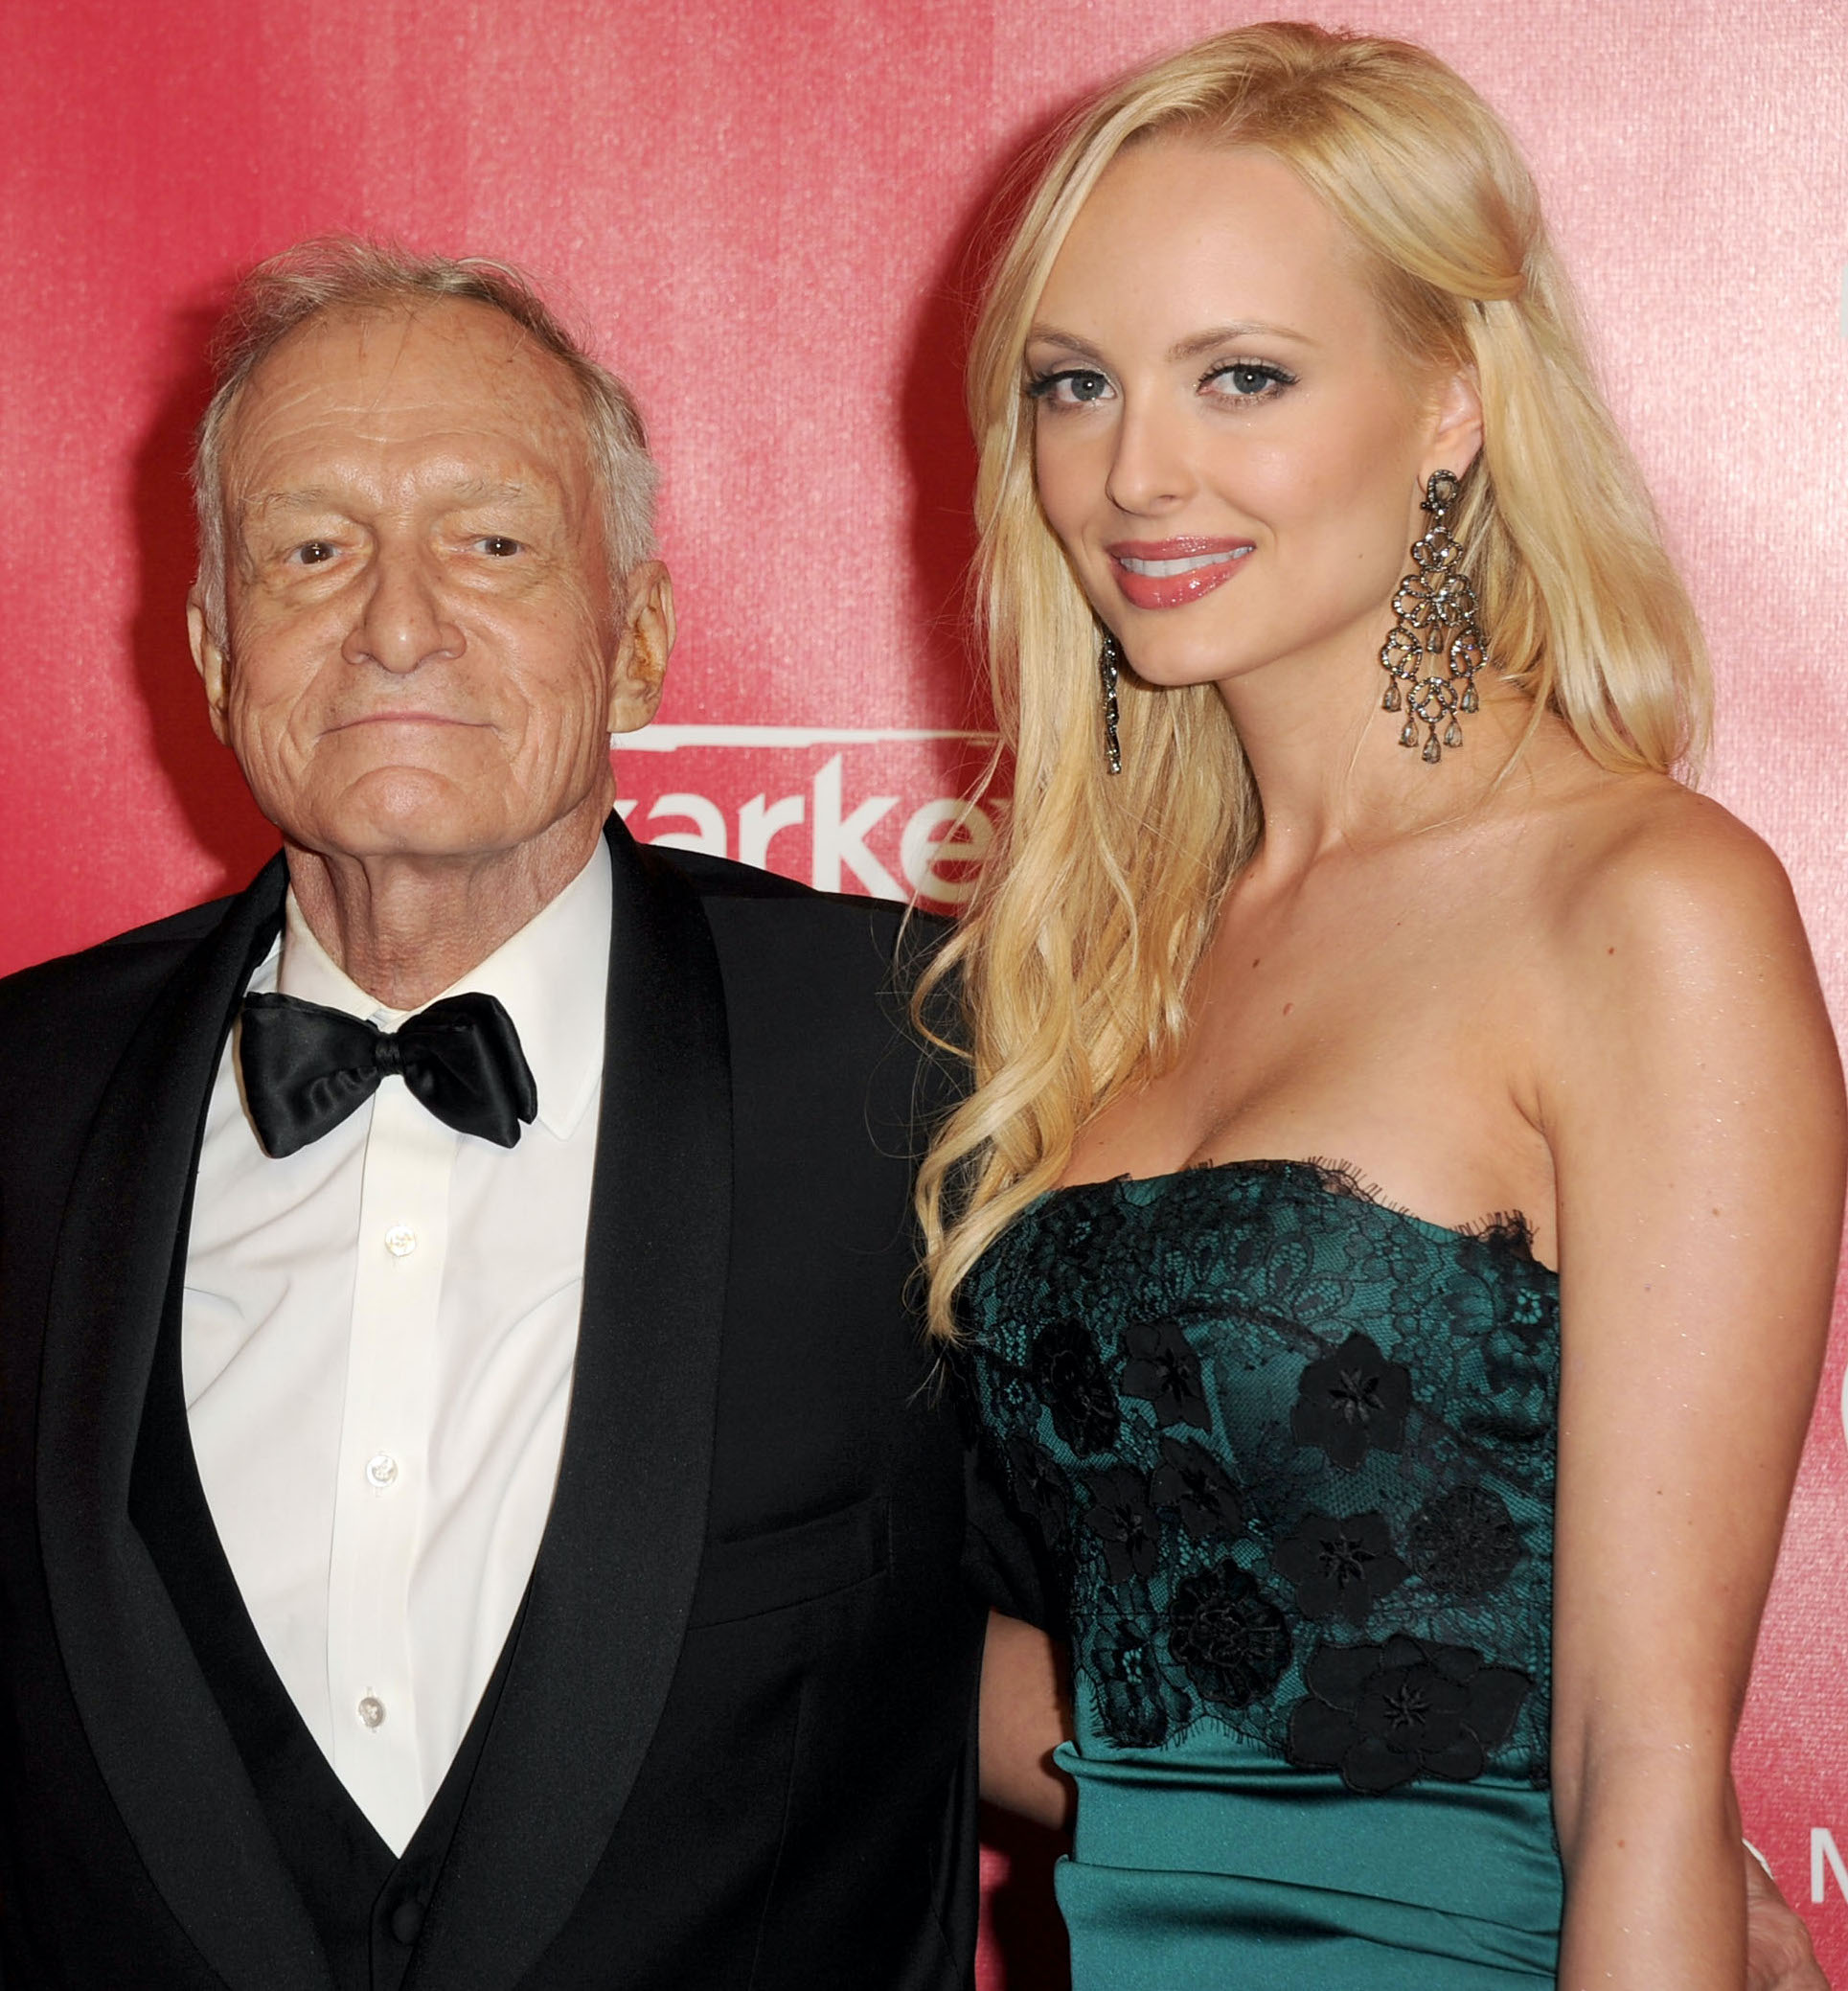 Hugh Hefners ex claims she aborted his child as a teenager Wonderwall image pic